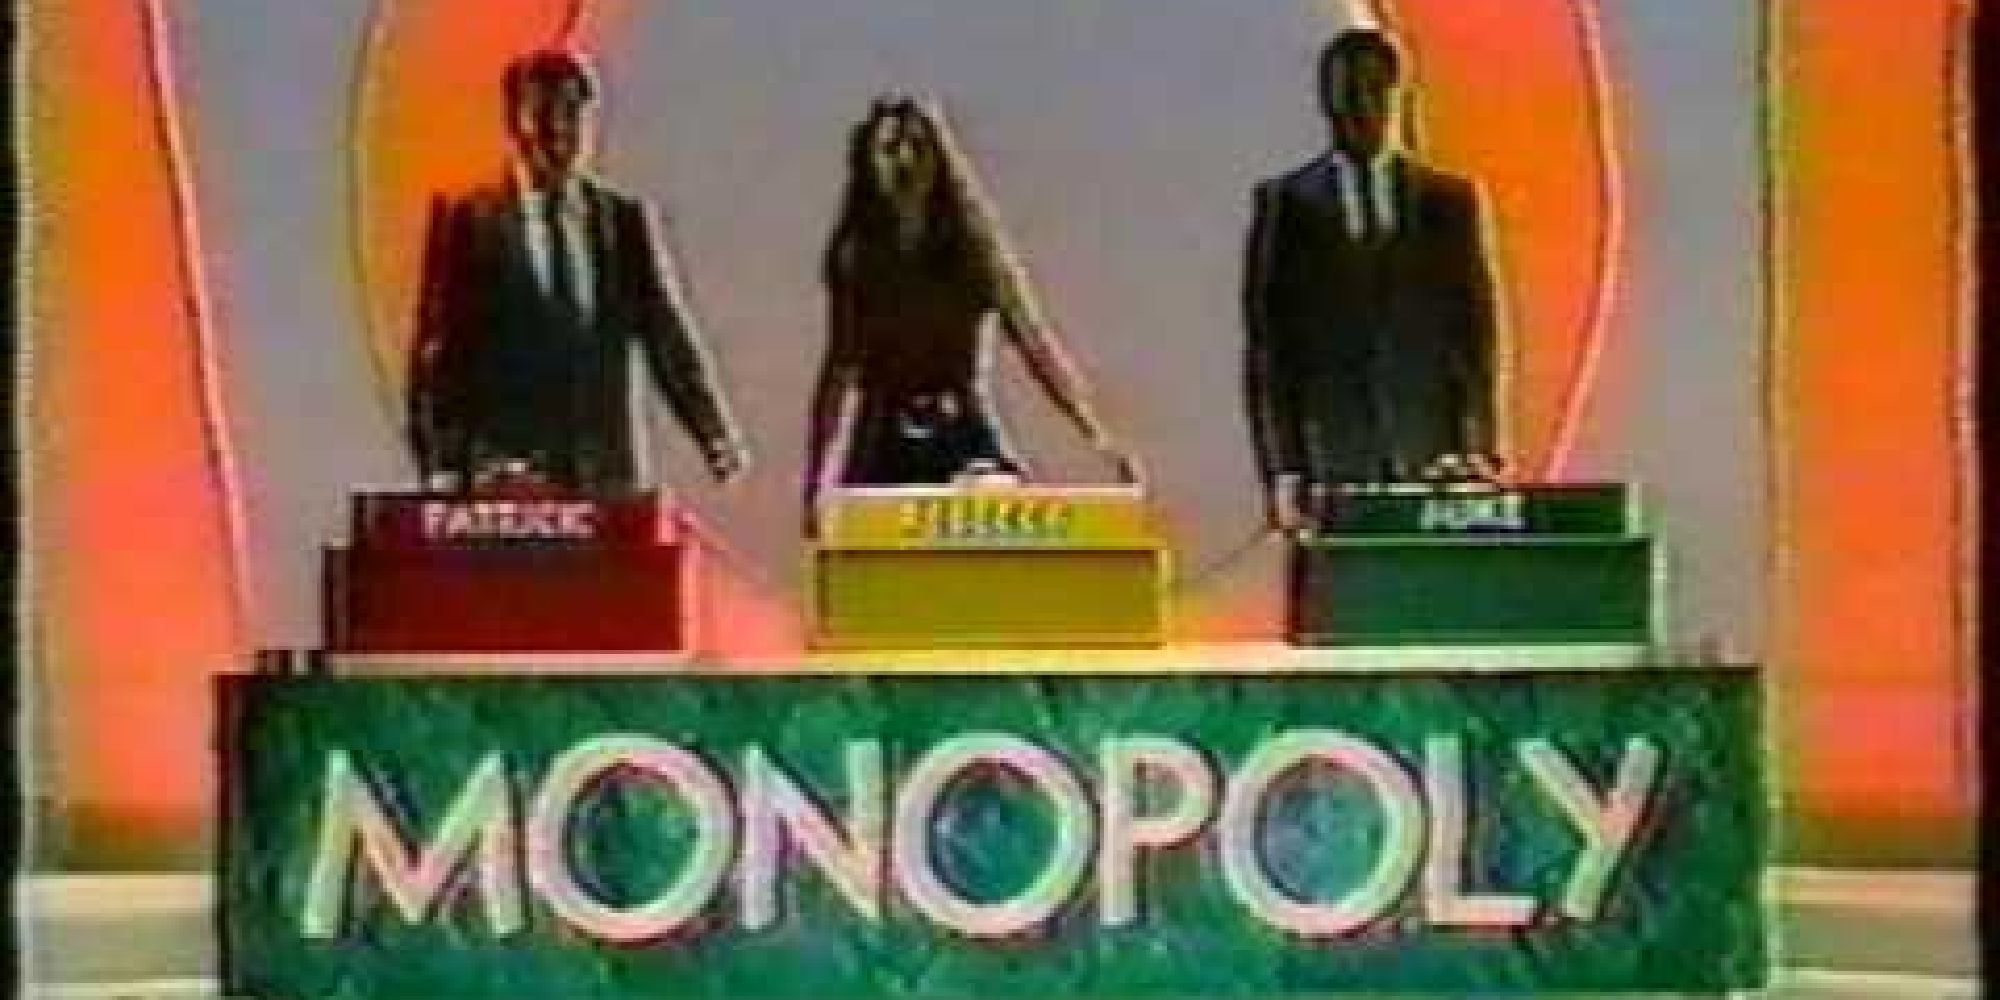 Three contestant on an episode of the Monopoly game show from 1990